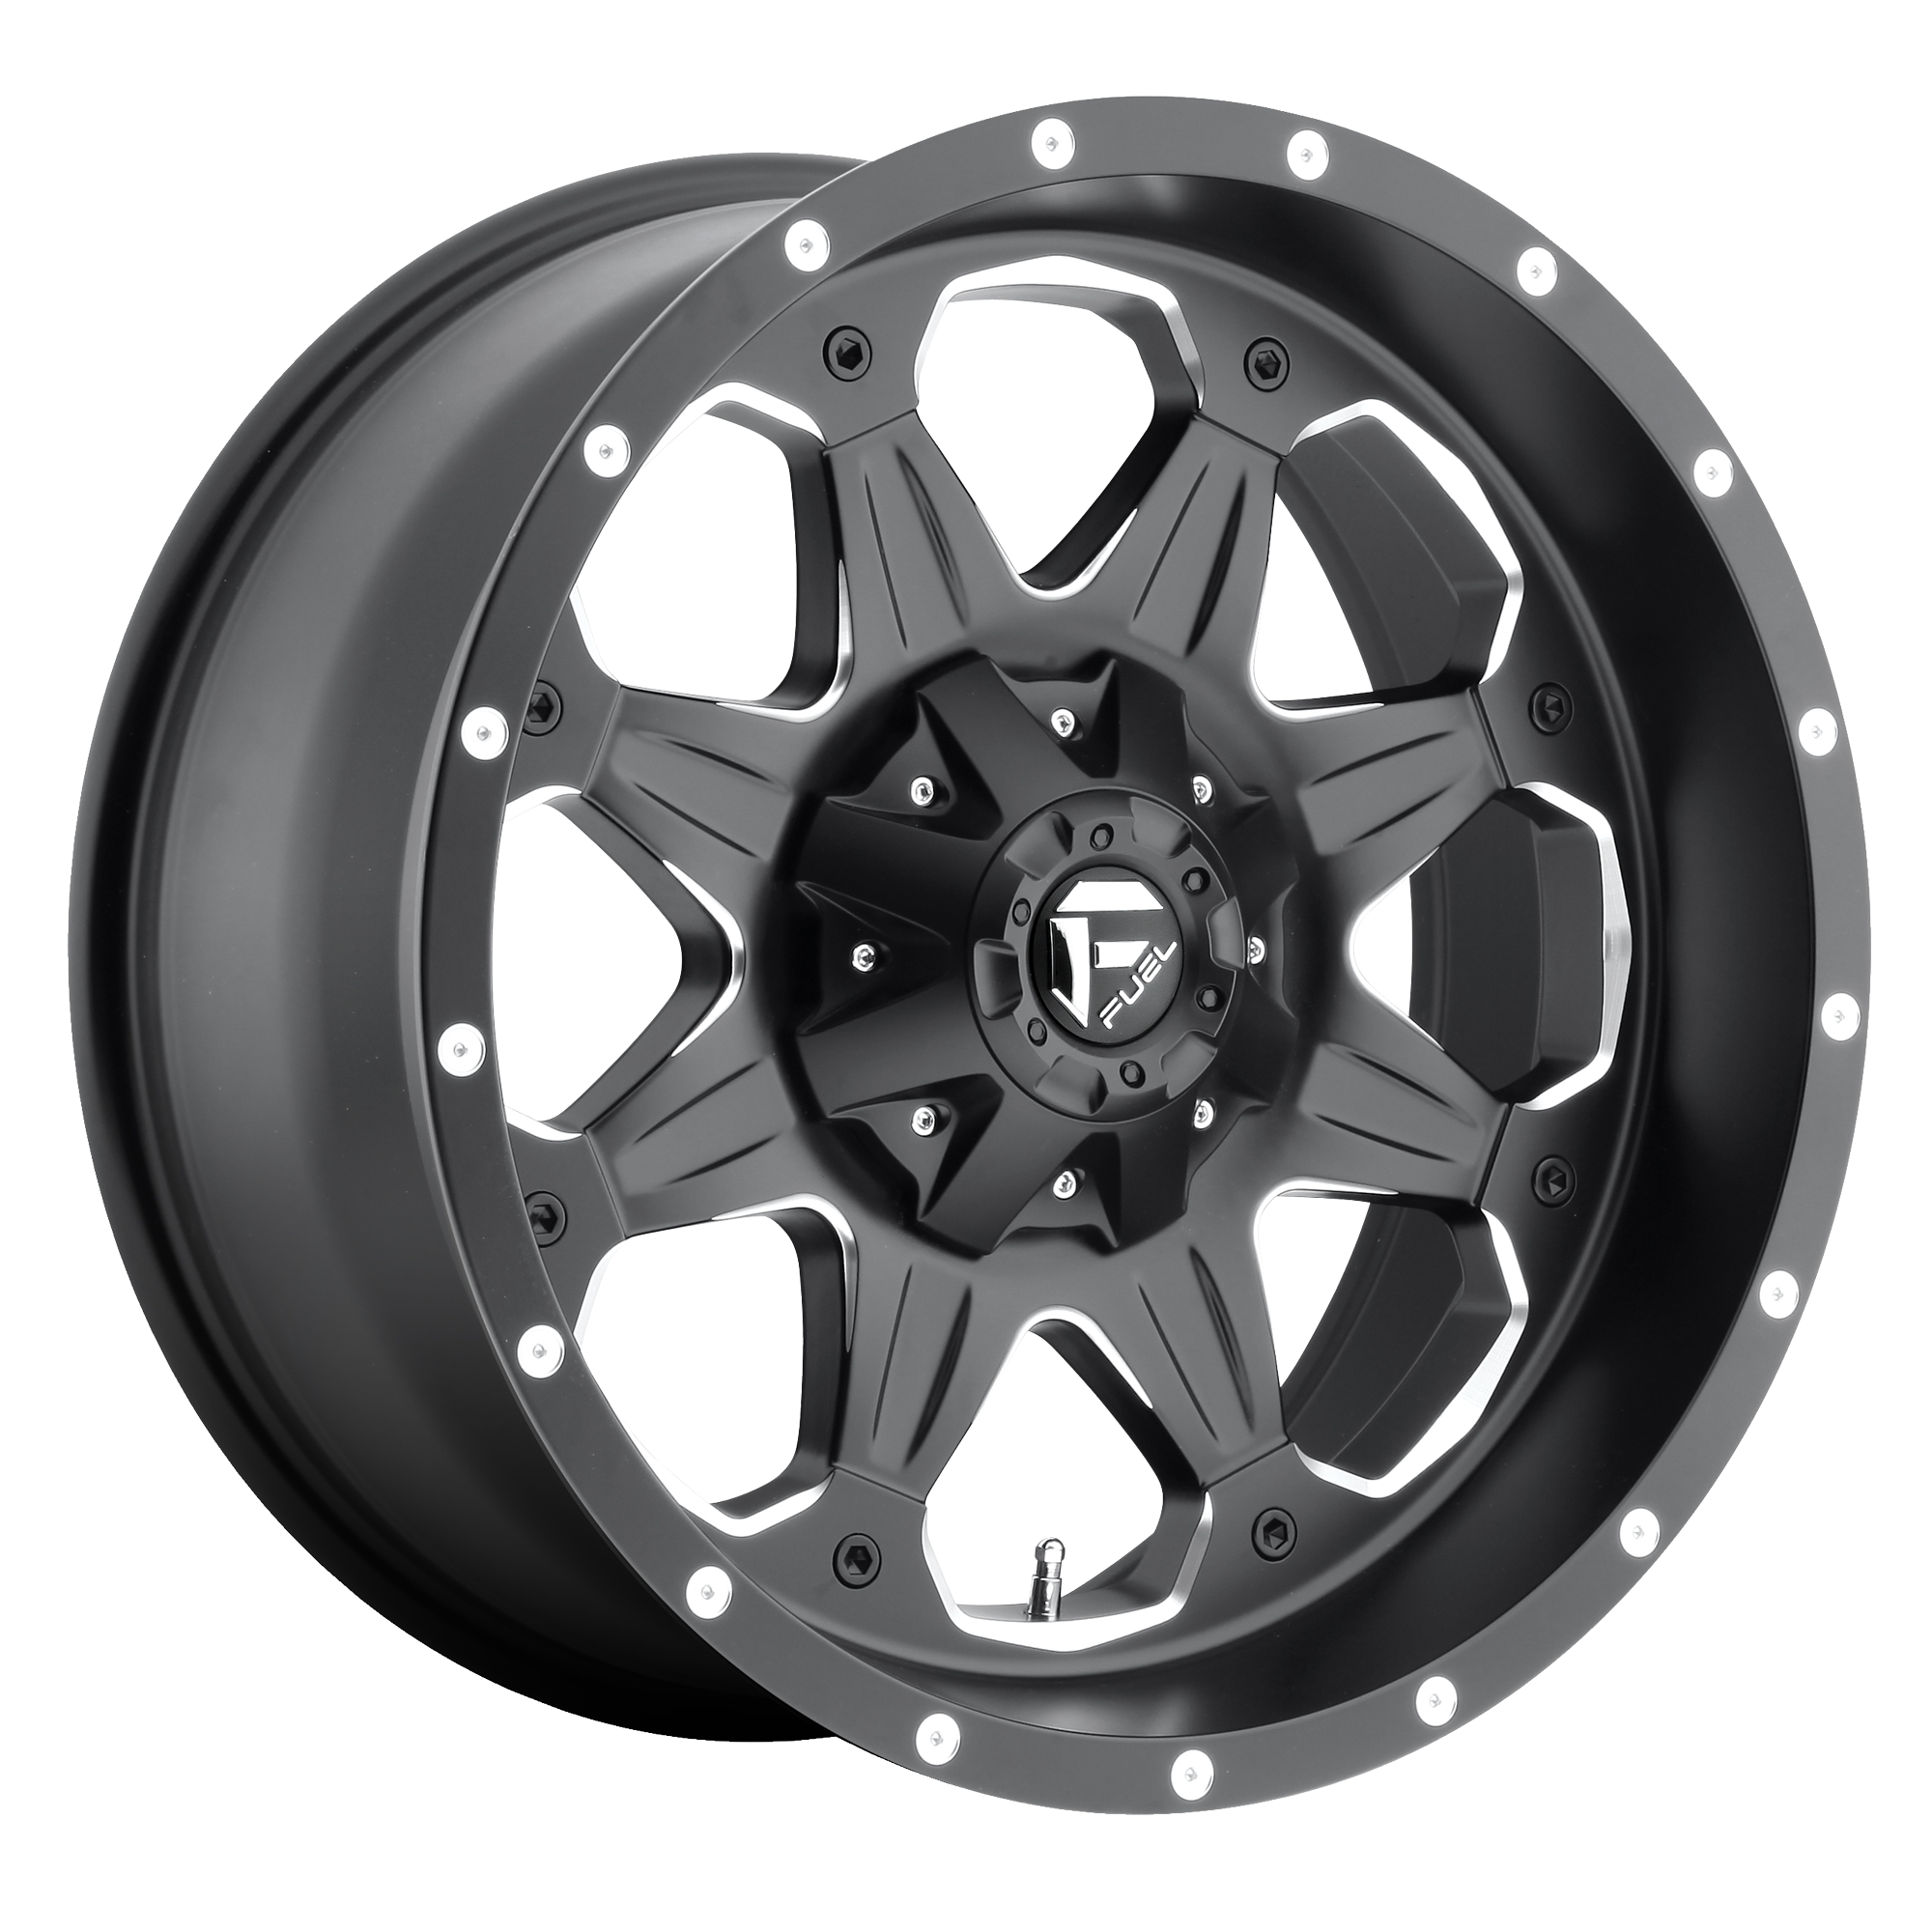 BOOST 17x9 5x114.30/5x127.00 MATTE BLACK MILLED (-12 mm) - Tires and Engine Performance